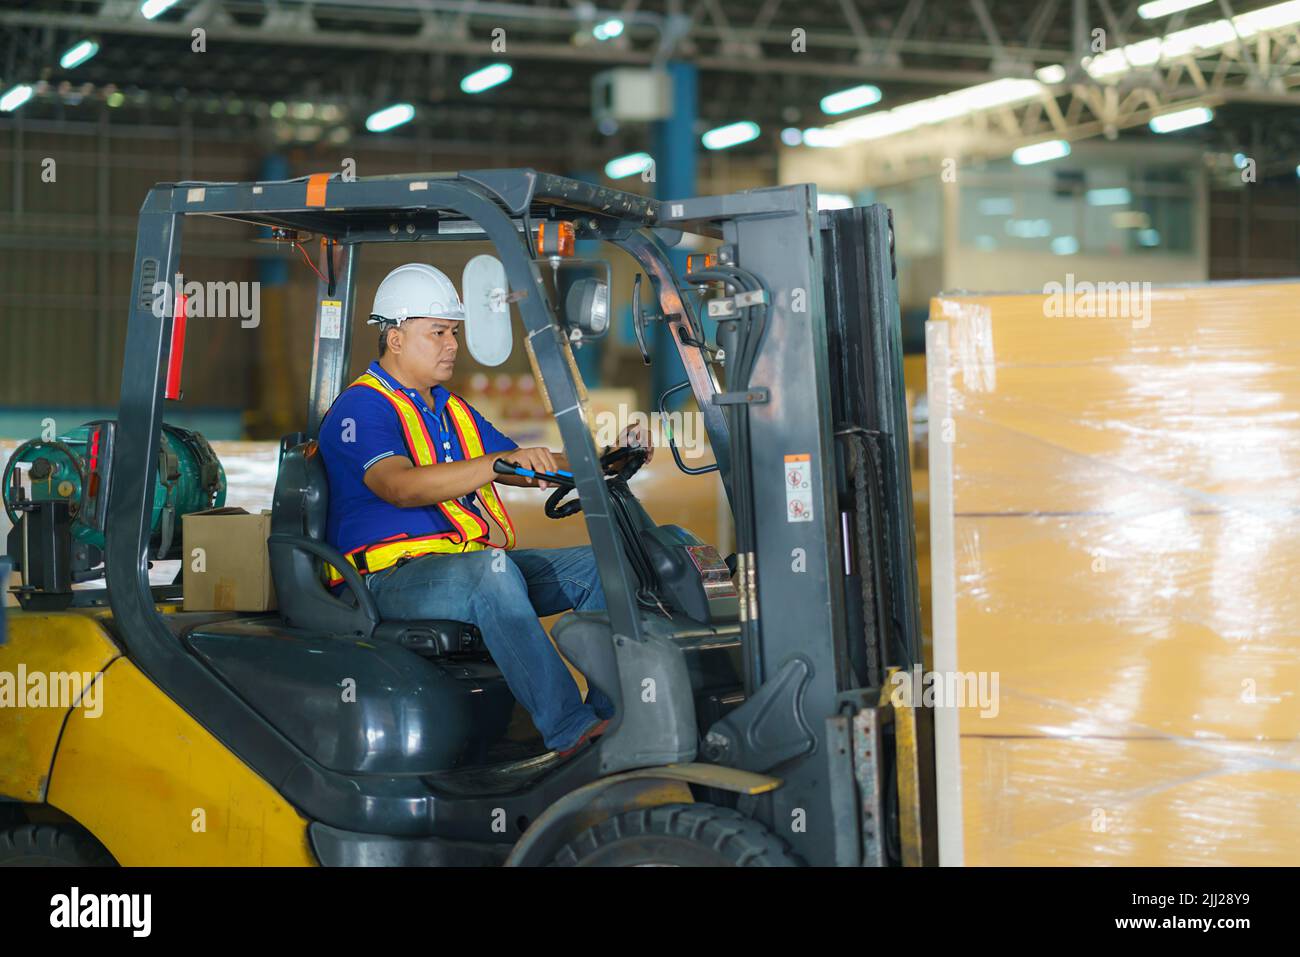 Forklift are loading into cargo containers at warehouses, ports, freight forwarding, cargo supply chains, cargo transportation, warehouse industry, lo Stock Photo